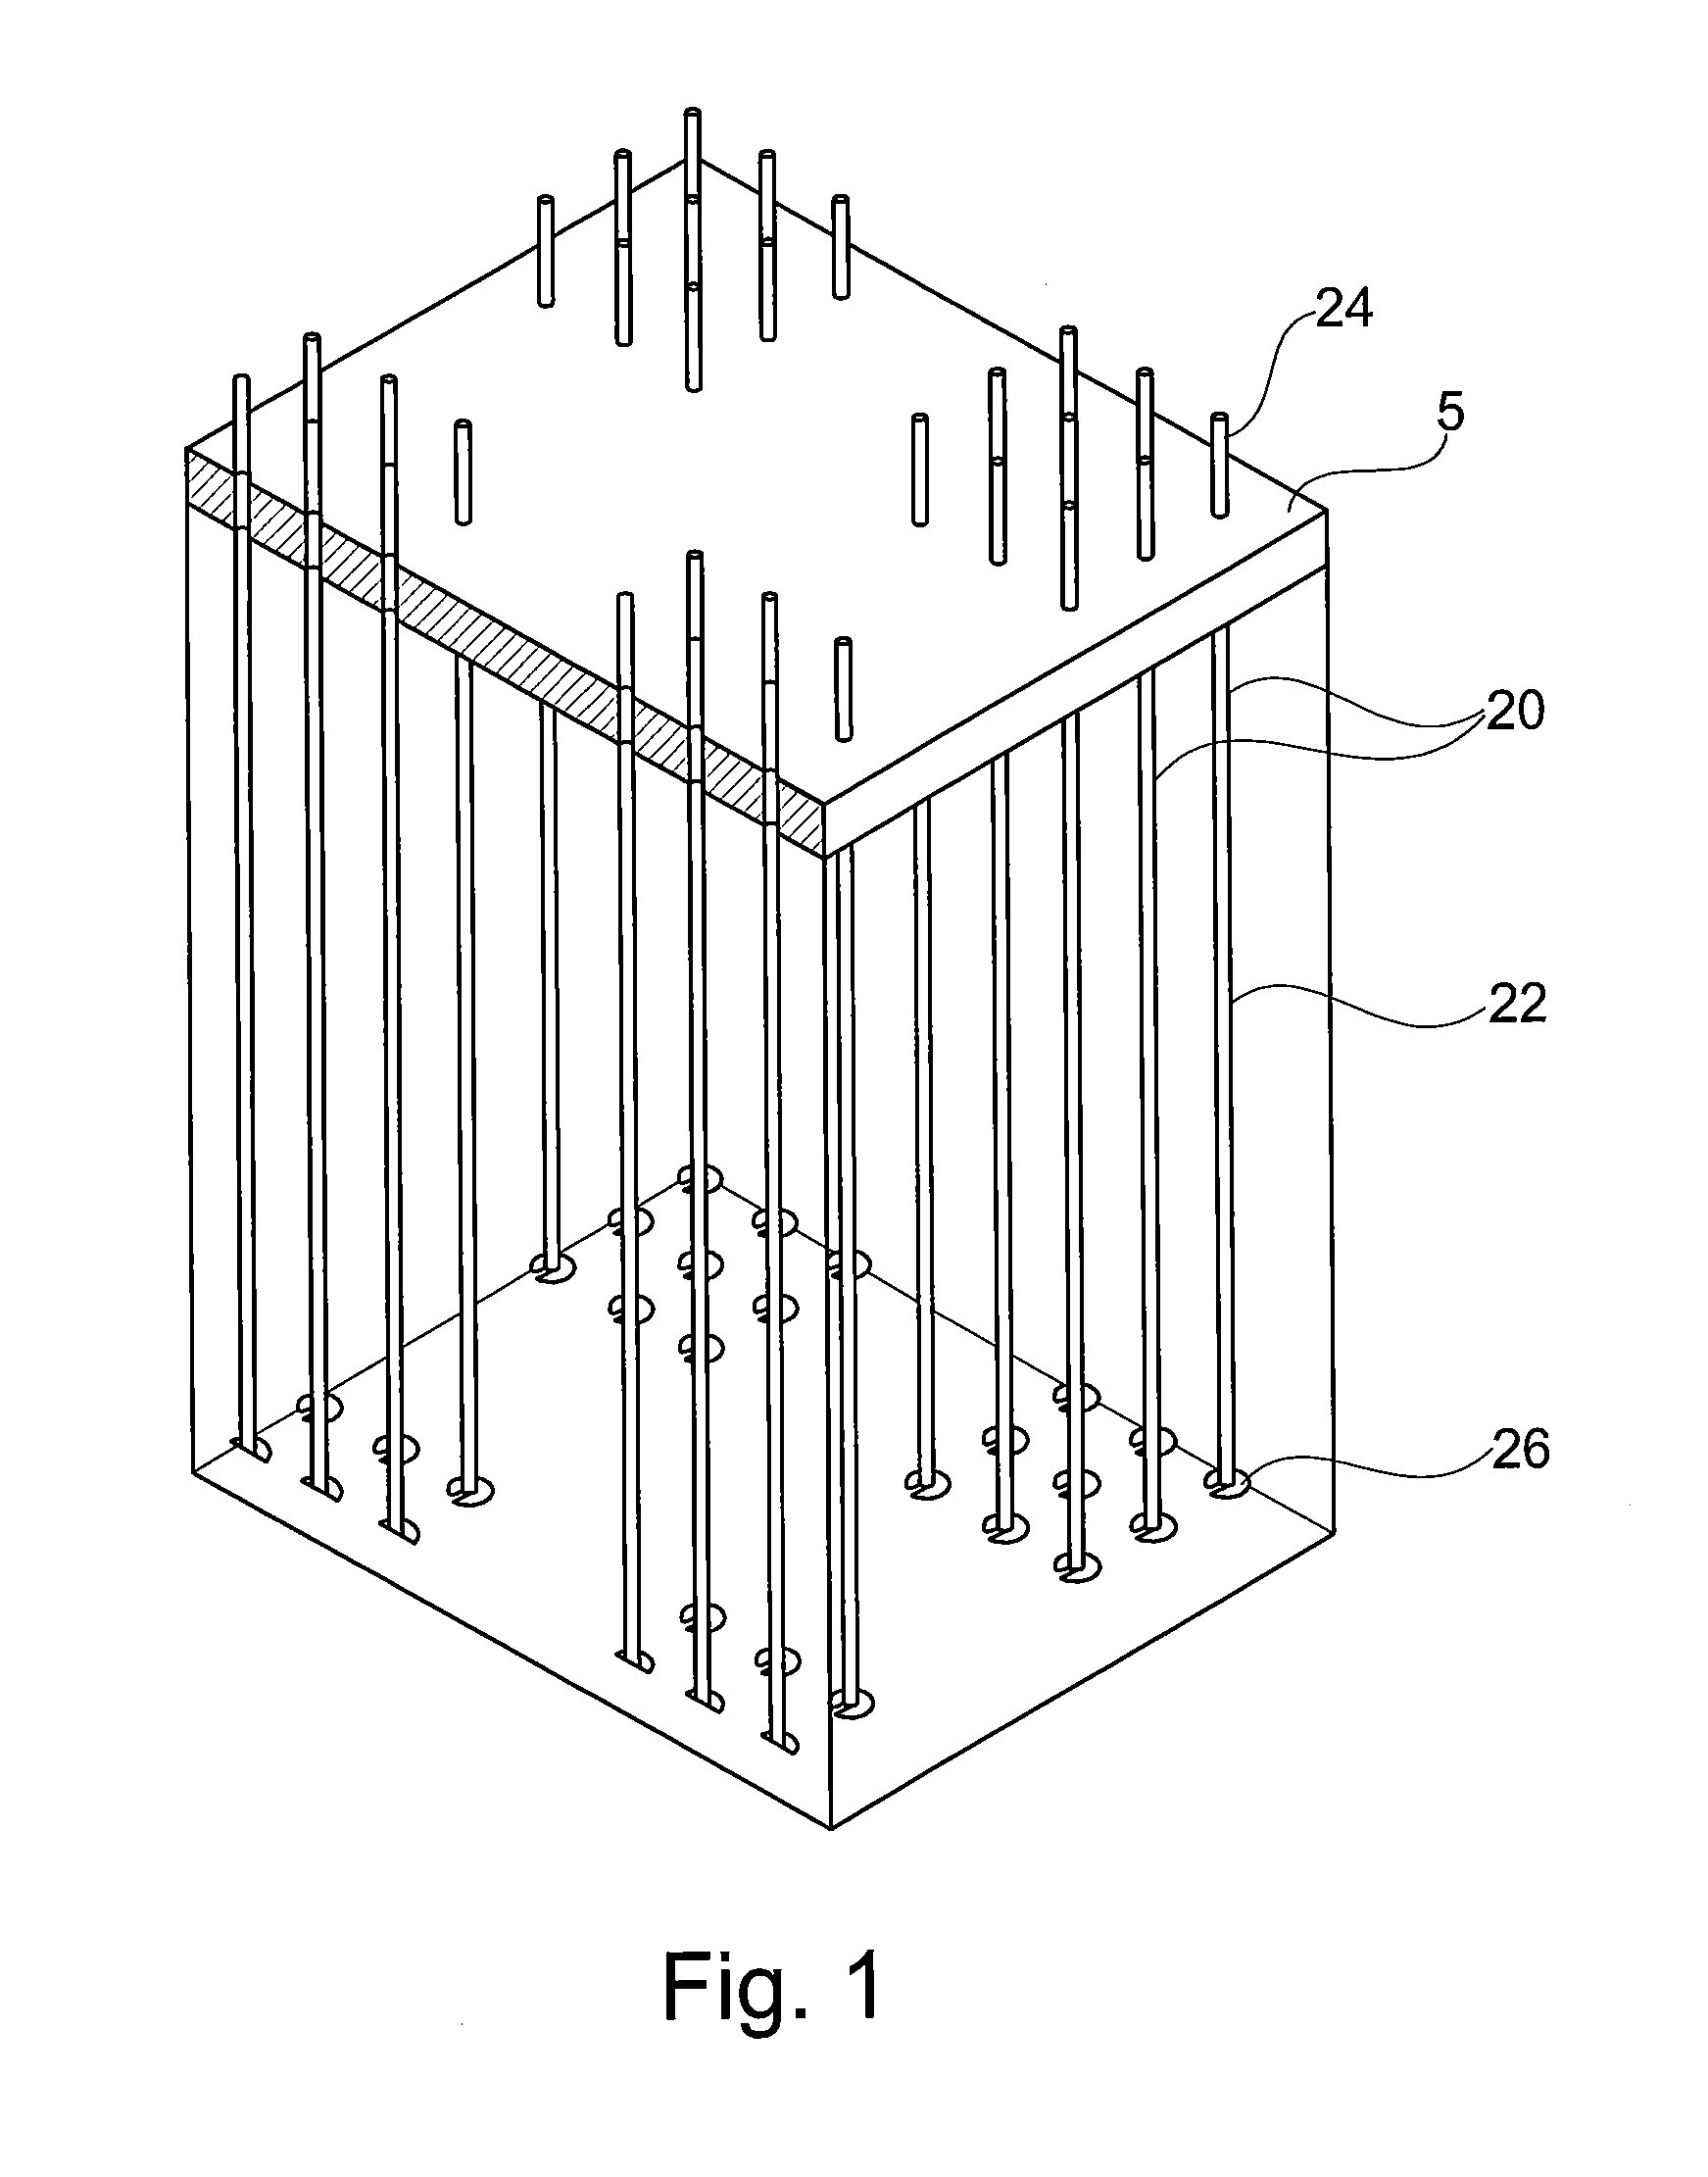 Method for anchoring a structure in a bed of a body of water and underwater foundation